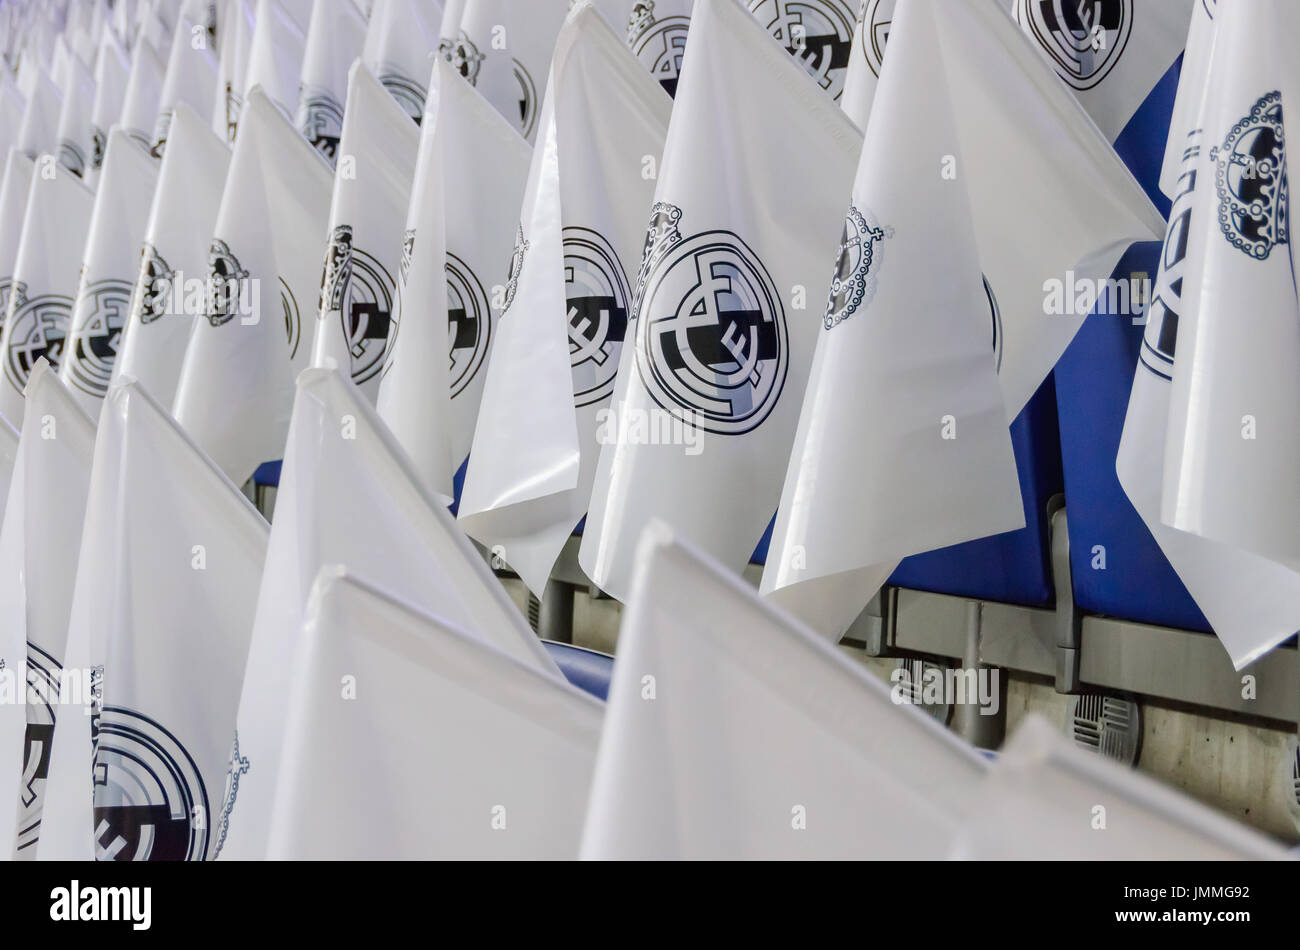 MADRID, SPAIN - JUNE 19: Real madrid flags before the match, on June 19, 2015. Real Madrid flags and symbols are used for encourage the players during a match Stock Photo